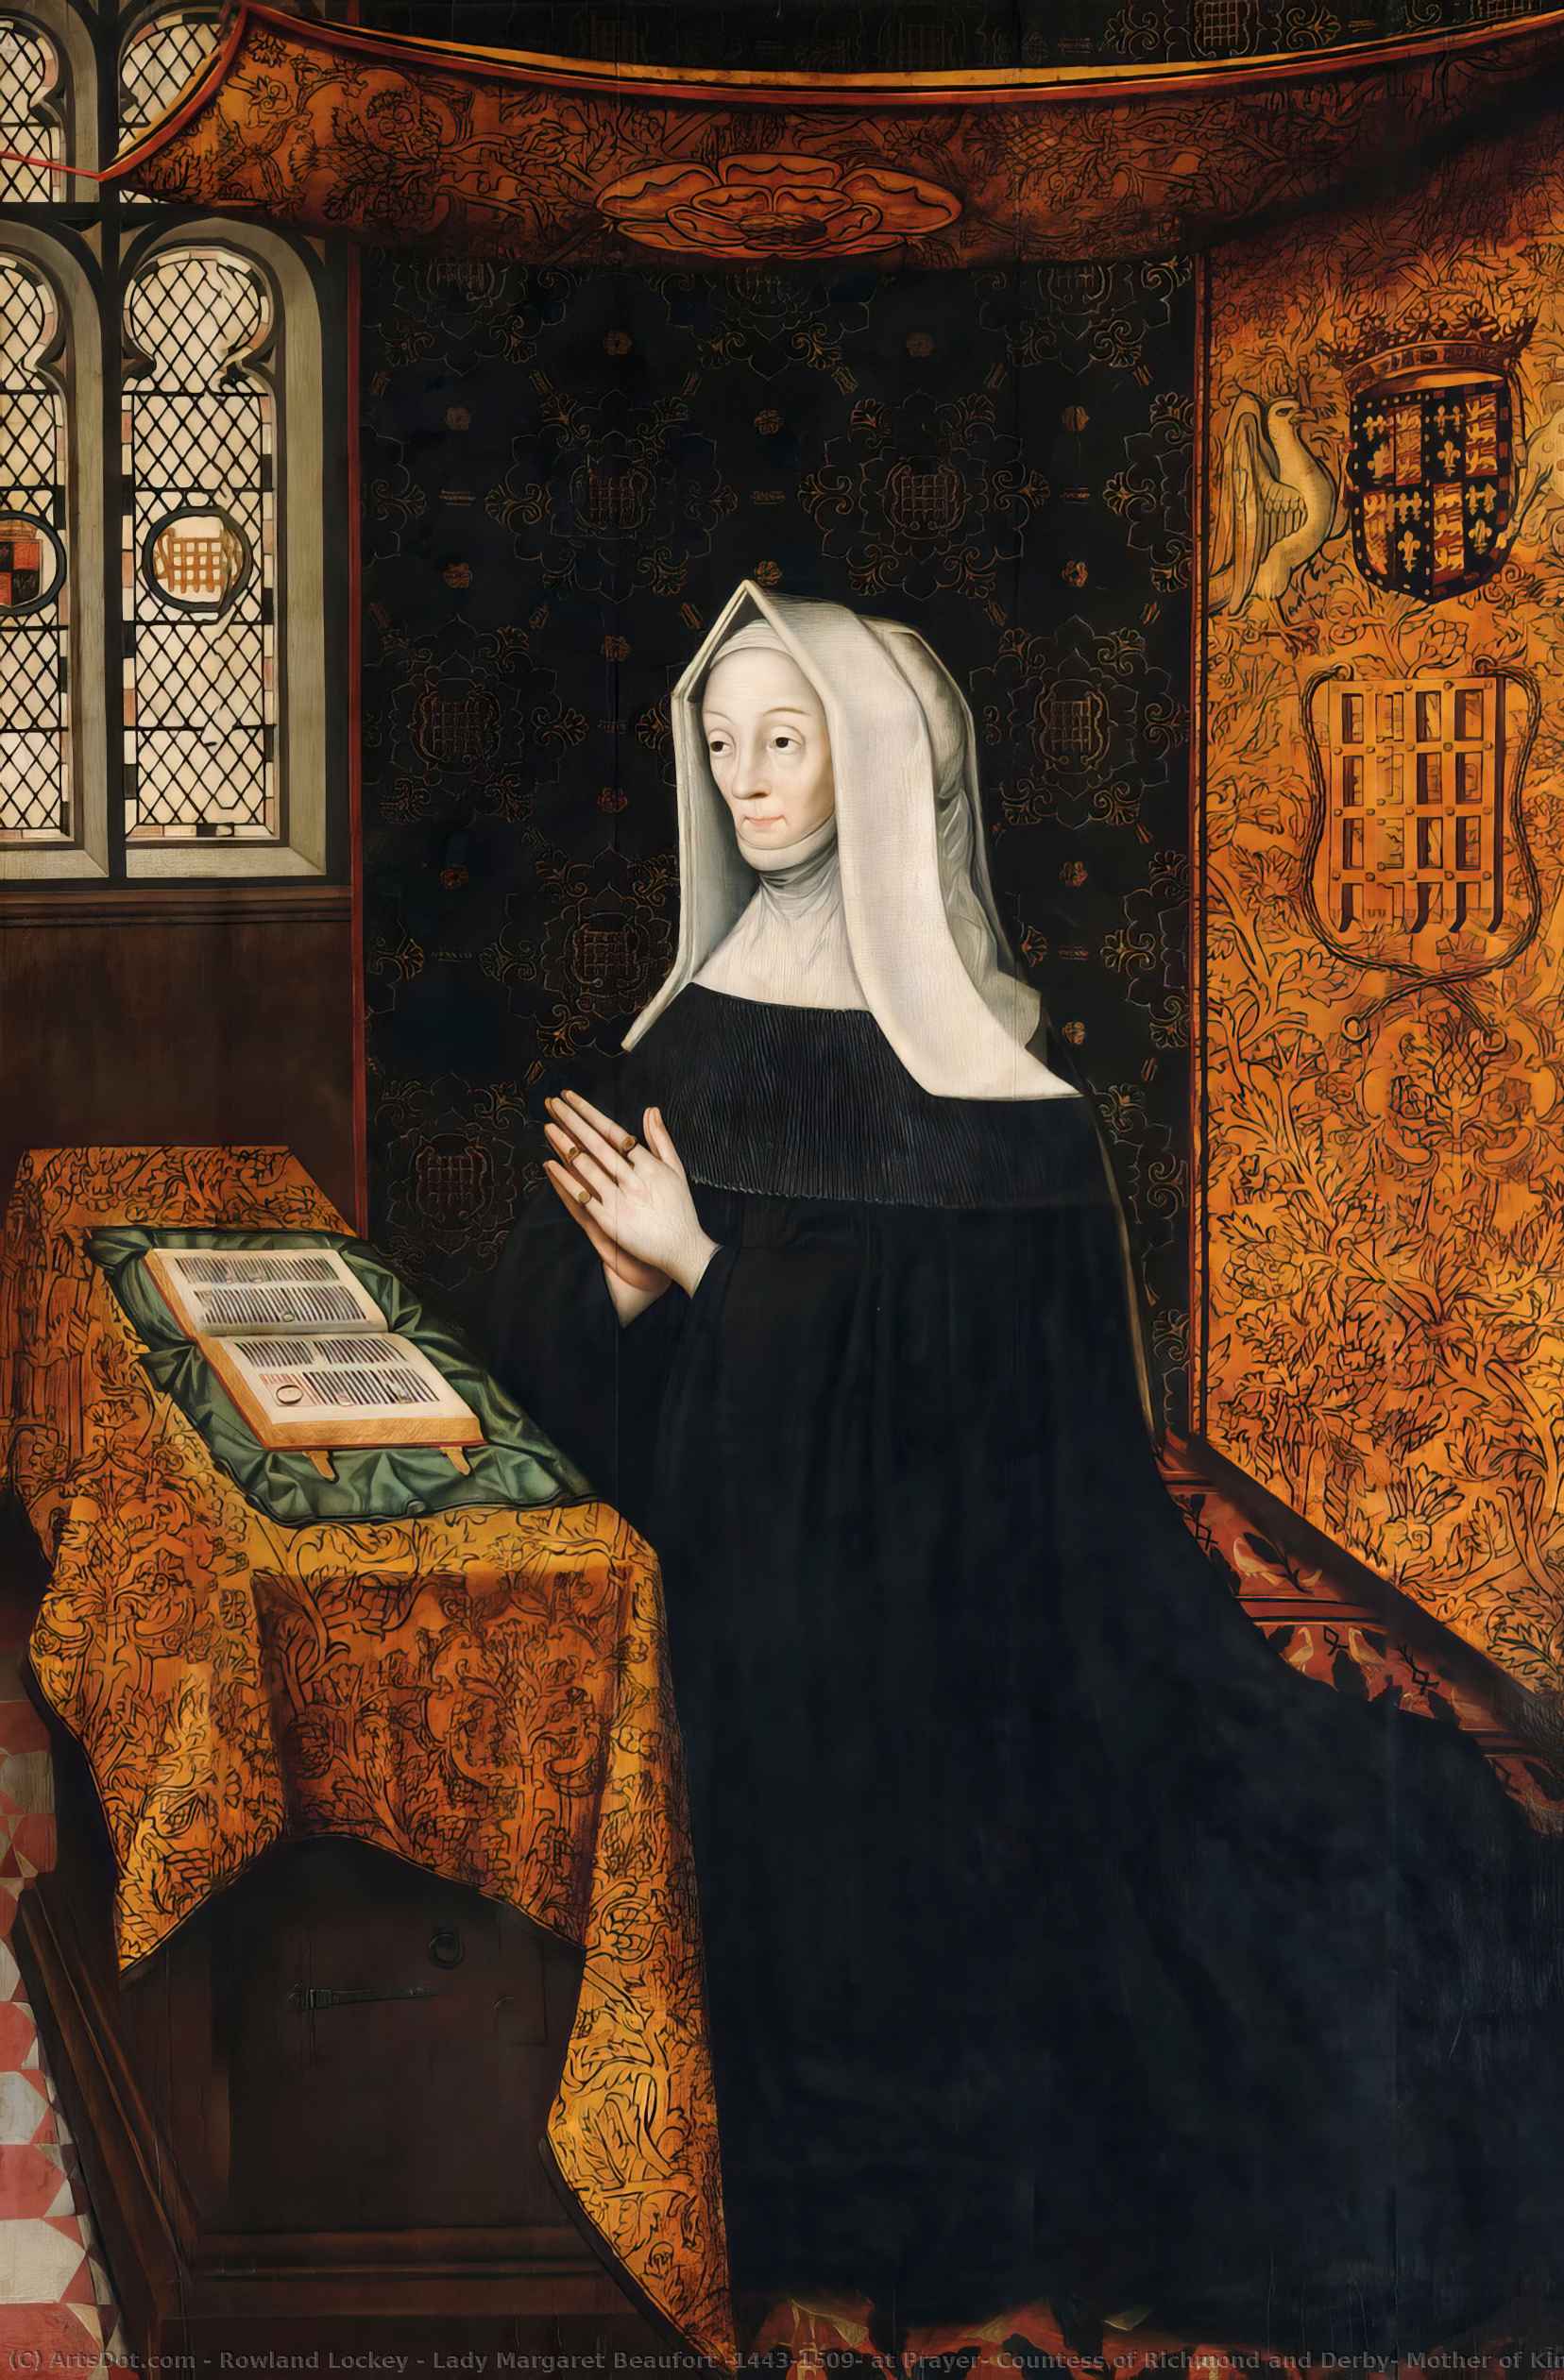 Buy Museum Art Reproductions Lady Margaret Beaufort (1443–1509) at Prayer, Countess of Richmond and Derby, Mother of King Henry VII and Foundress of the College by Rowland Lockey (1565-1616) | ArtsDot.com